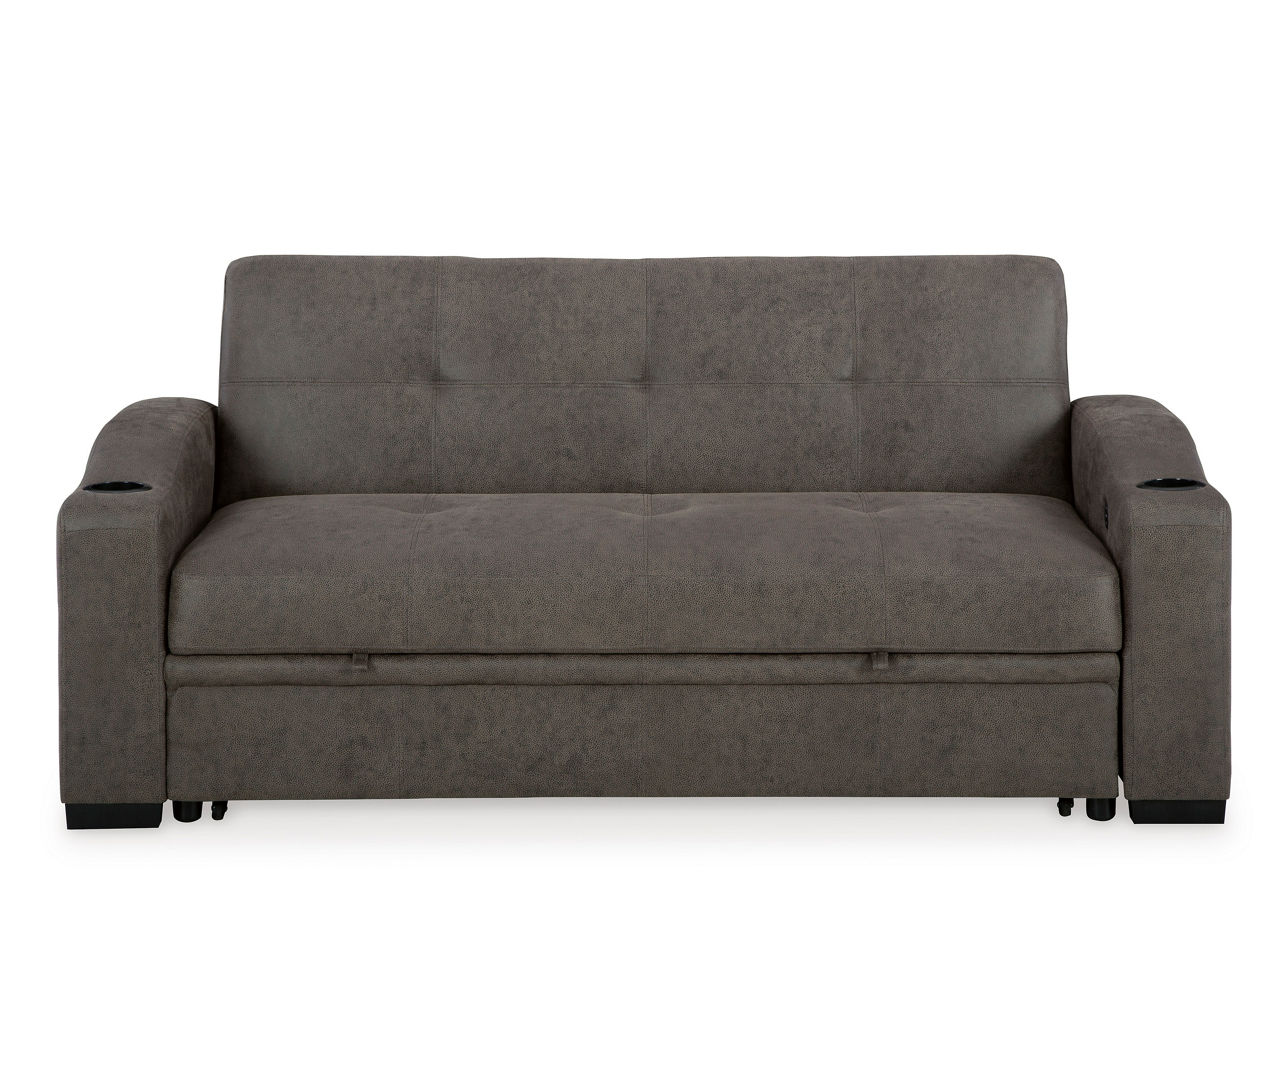 Hermosa Faux Leather Pop-Up Sleeper Sofa